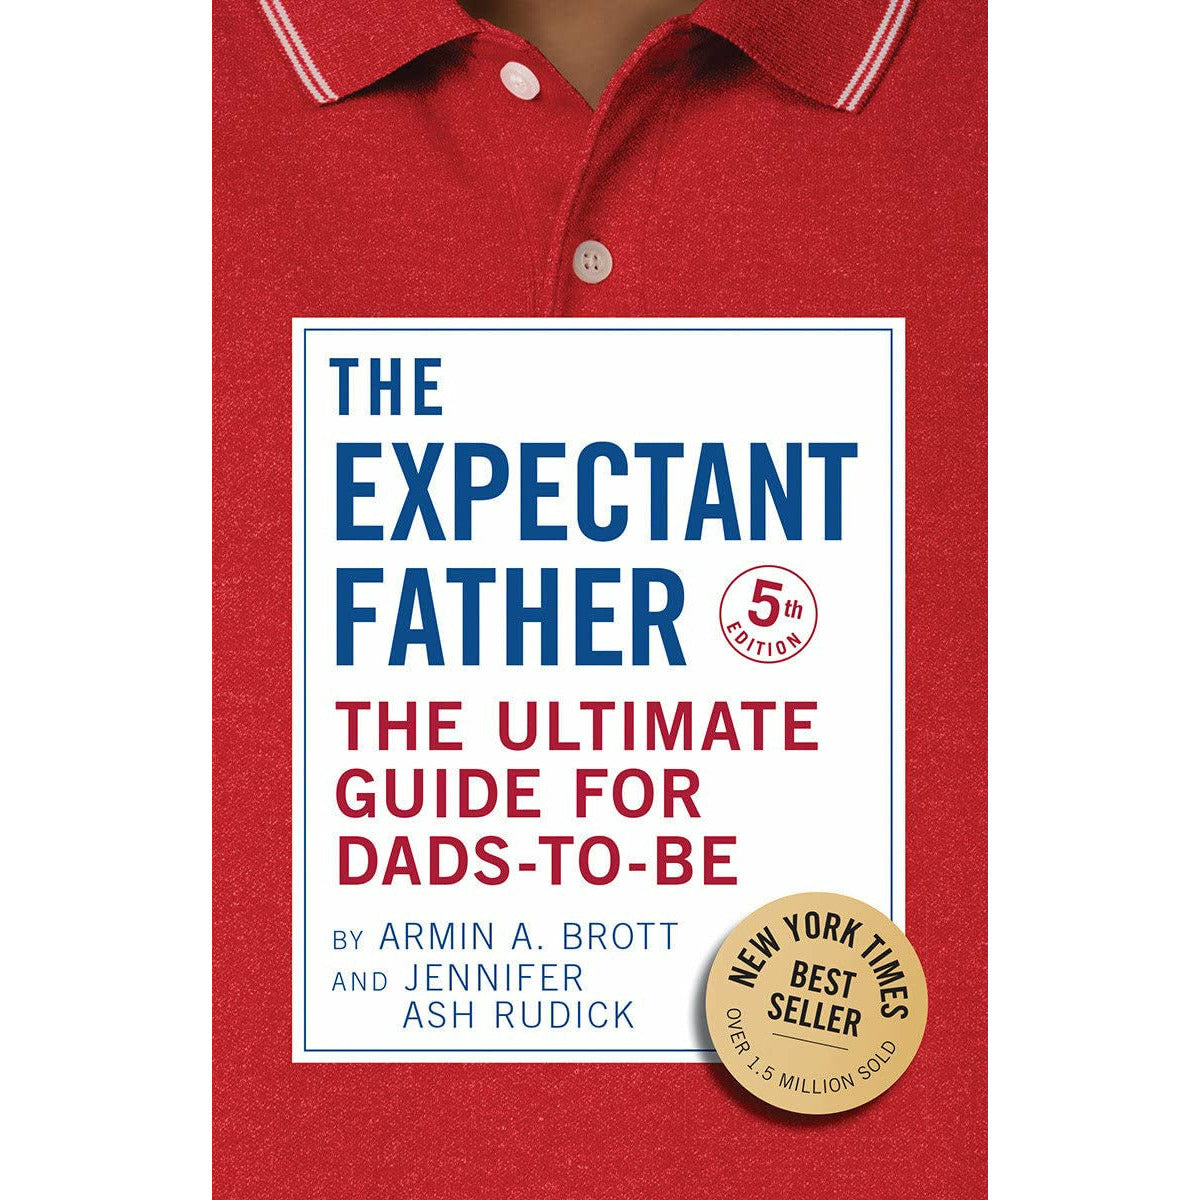 The Expectant Father: The Ultimate Guide for Dads-To-Be